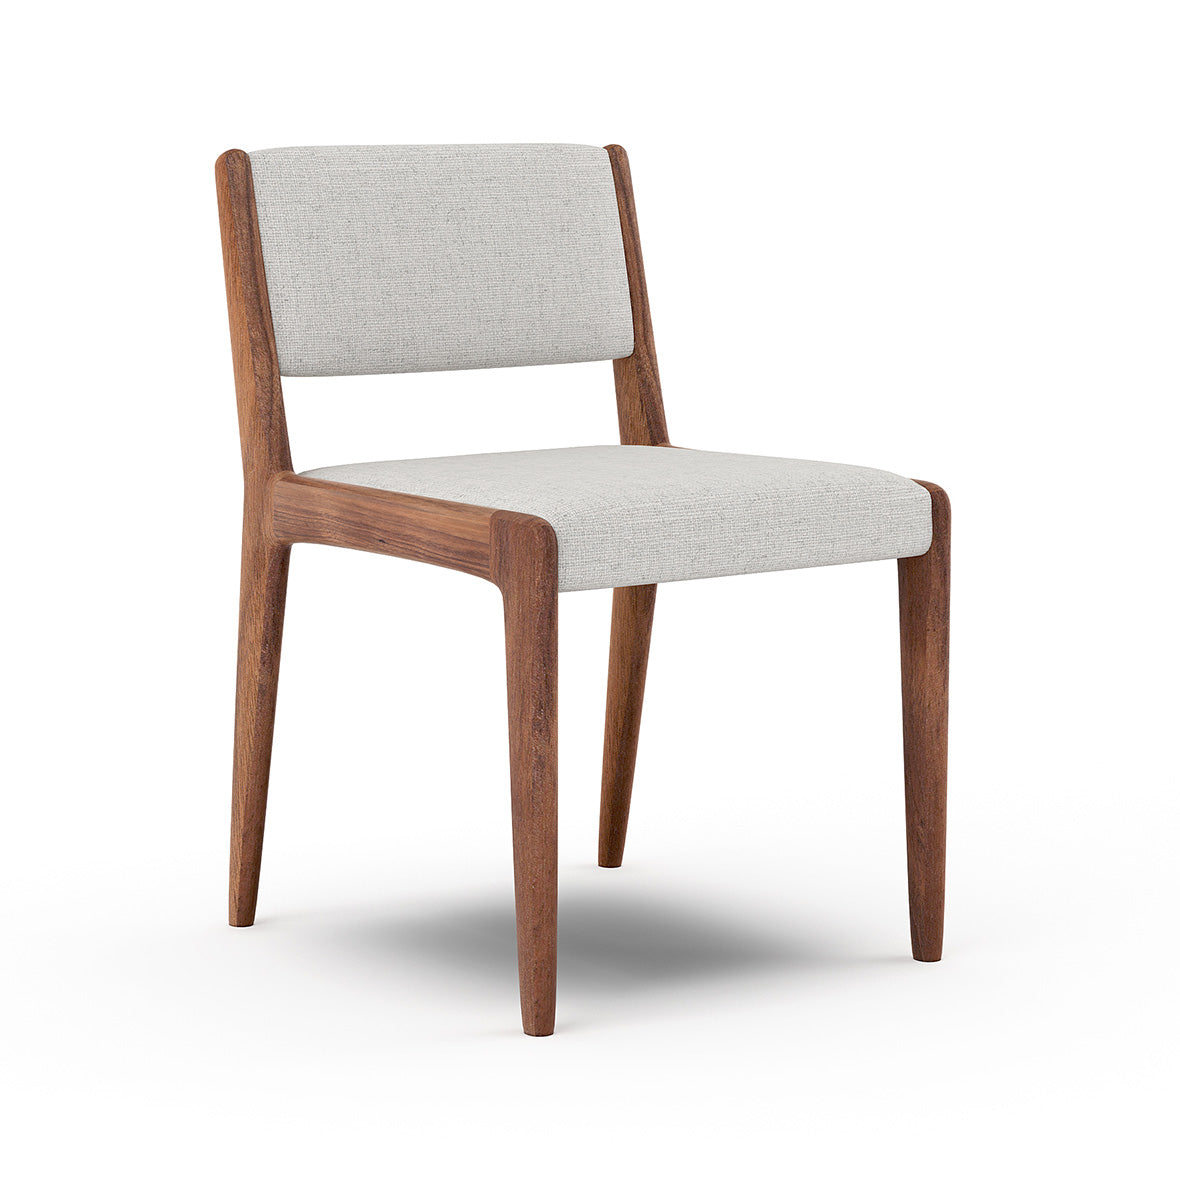 Jasmi Dining Chair by Medley - Mid-Century Eco-Friendly & Sustainable Furniture with Organic options